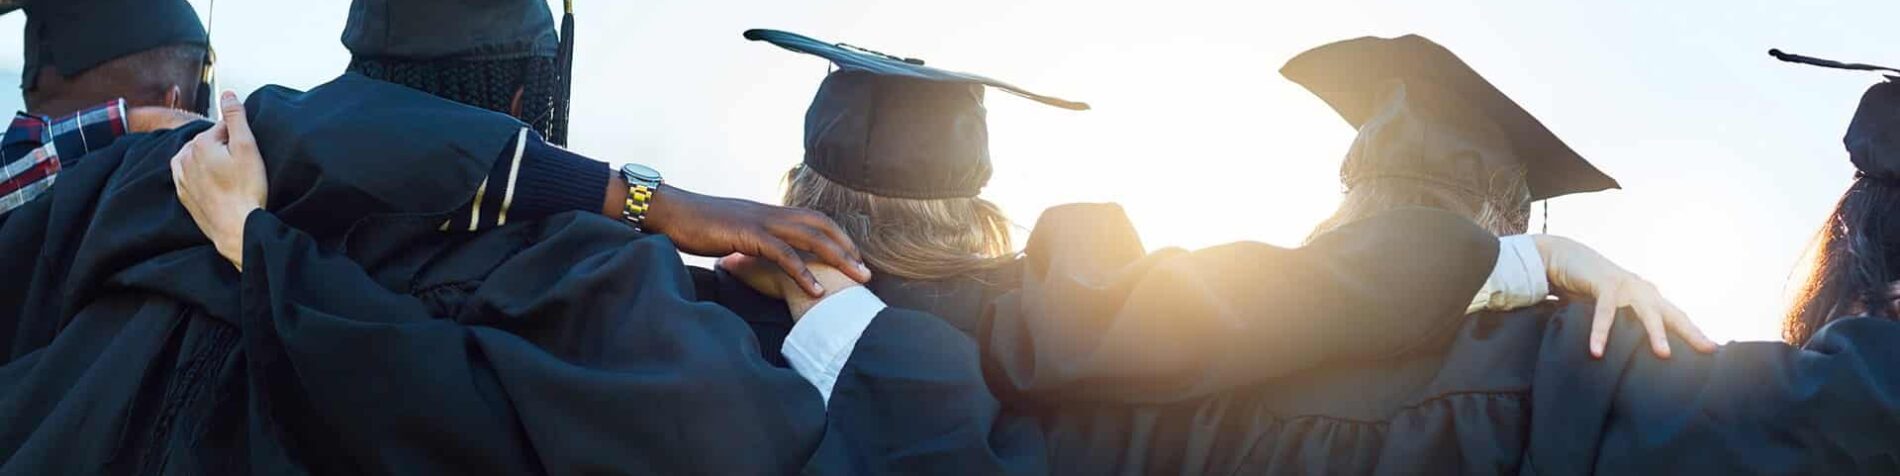 Breaking Barriers Through Education: SAP’s Partnership with University of the People